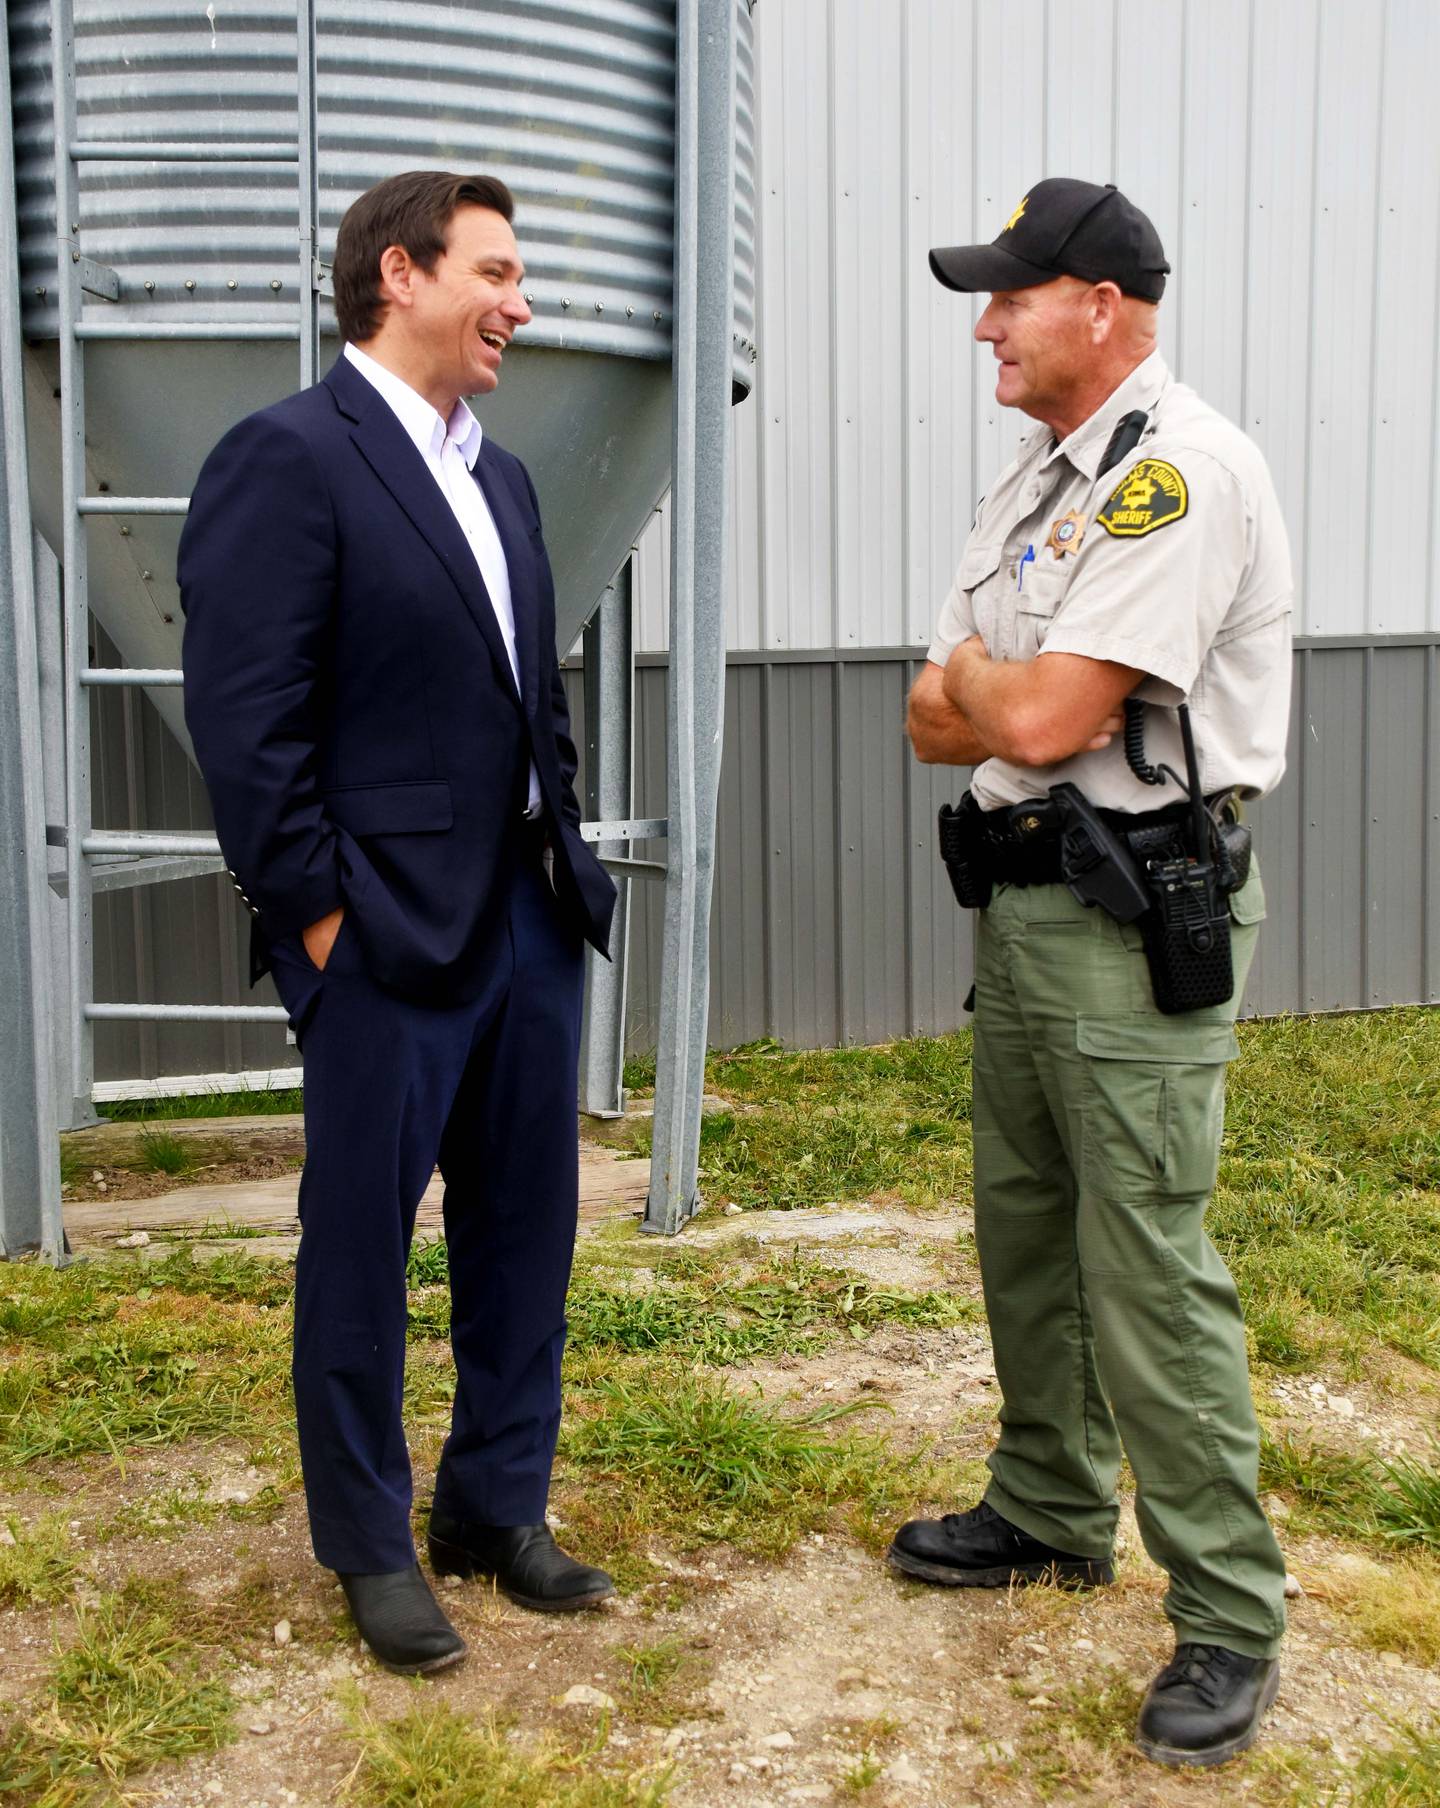 Gov. DeSantis meets Adams County Sheriff Alan Johannes before heading off to Des Moines for a gathering of evangelical Christians.